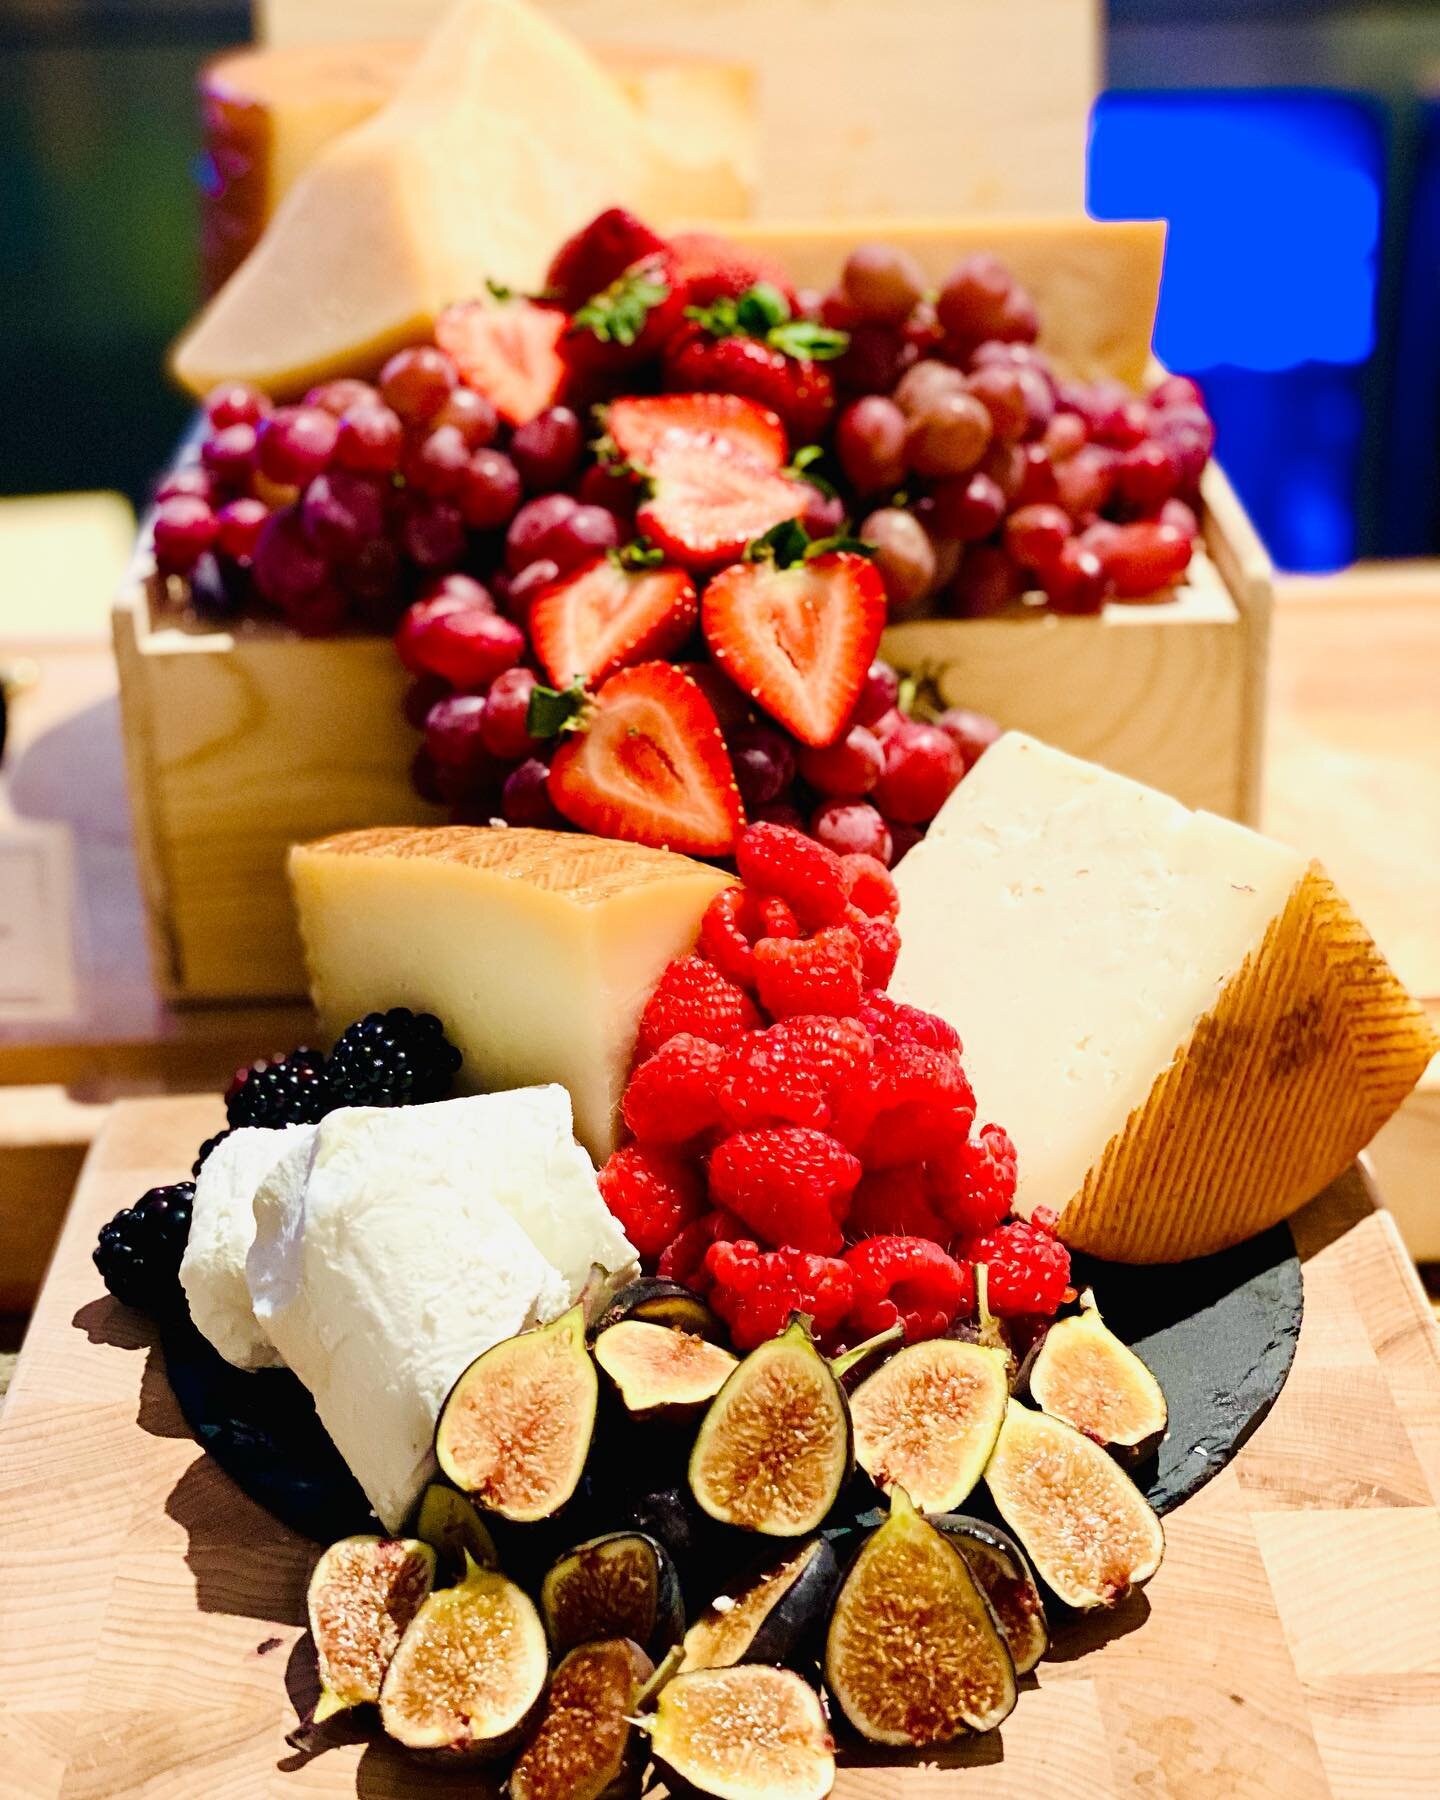 Game day cheese board is always a good idea 🧀

#cheeseboard #grazingboard #cheeseandwine #chasecenter #tasteofchasecenter